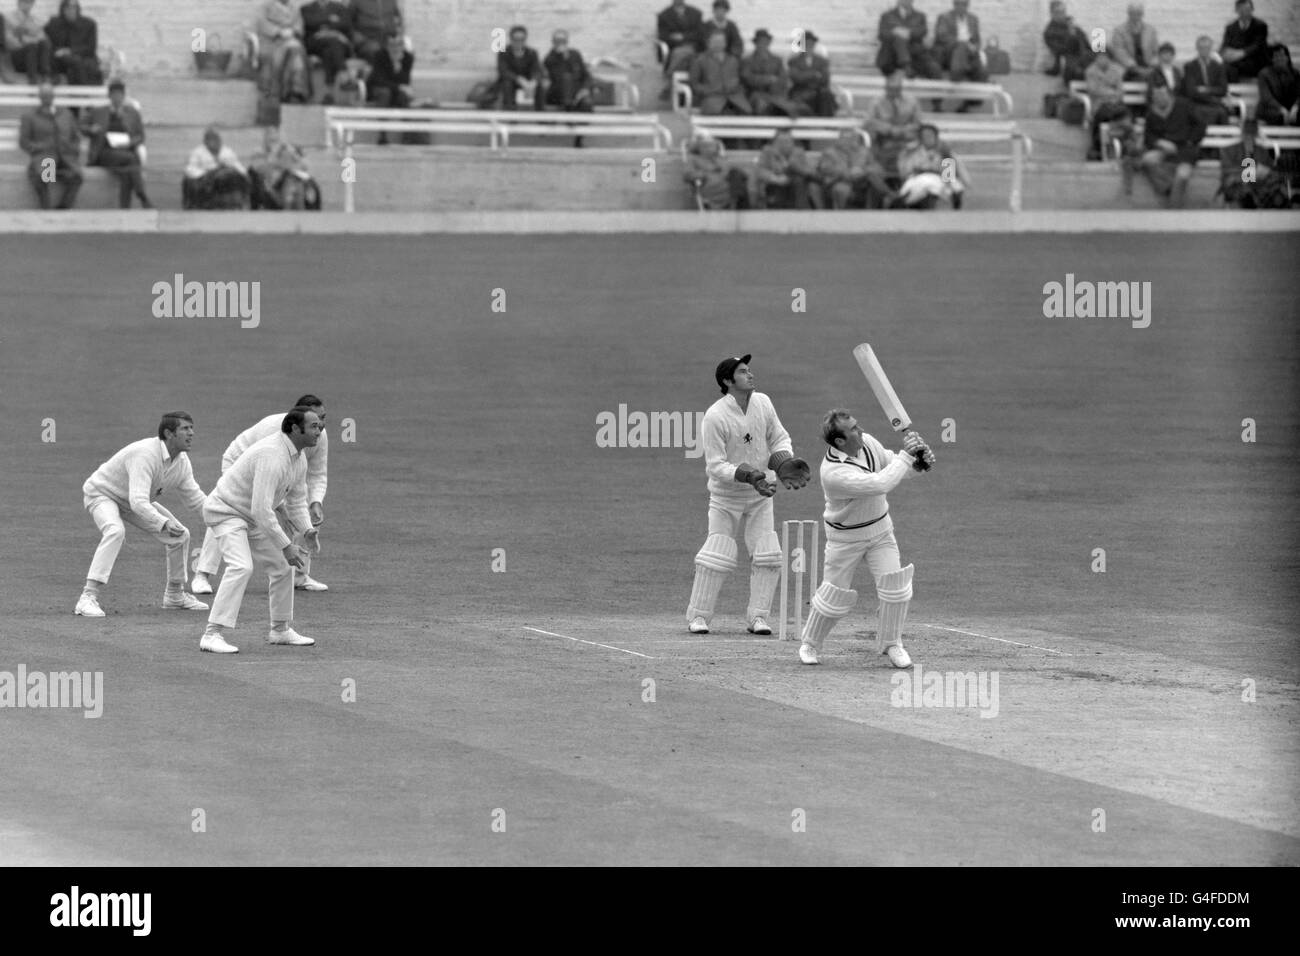 Cricket - County Championship 1970 - Kent v Warwickshire - Day One - Bat and Ball Ground, Gravesend. Neal Abberley in batting action for Warwickshire on his way to making 19 runs. The wicketkeeper for Kent is Alan Knott. Stock Photo